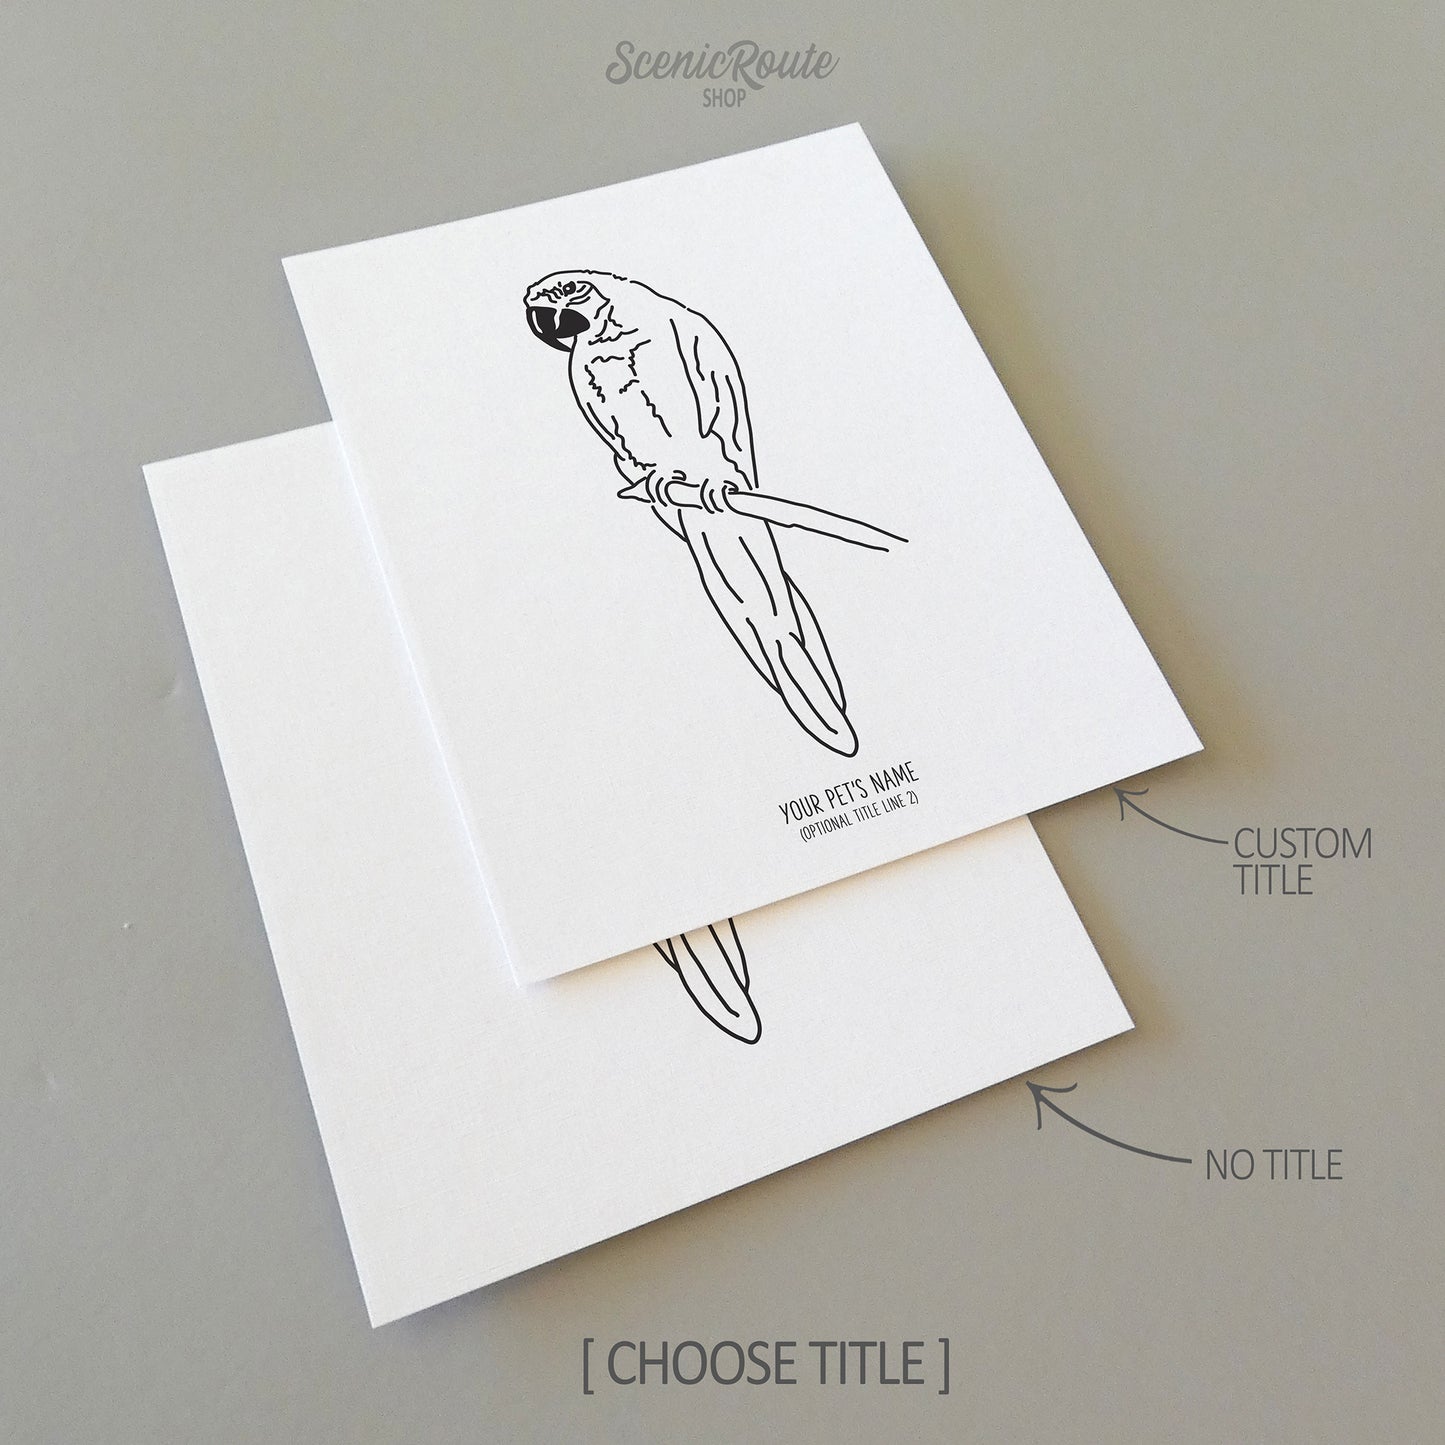 Two line art drawings of a Macaw Parrot on white linen paper with a gray background.  The pieces are shown with “No Title” and “Custom Title” options for the available art print options.